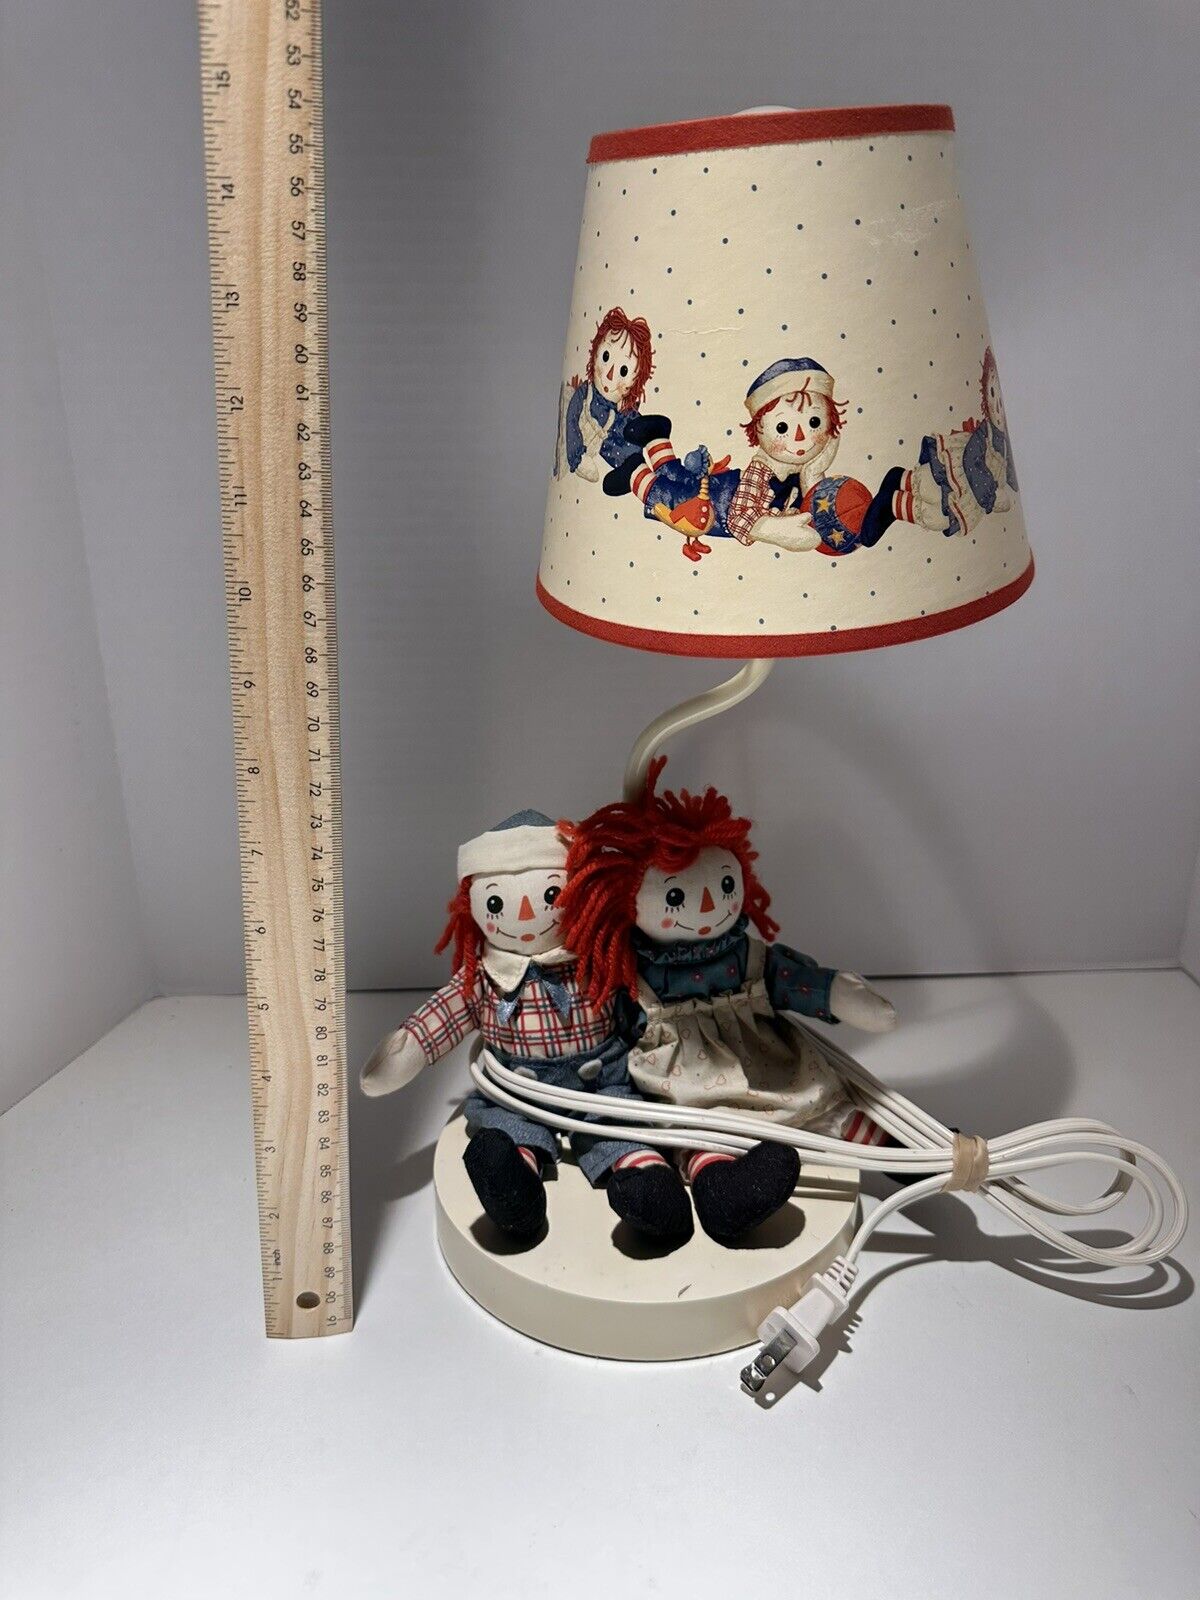 Vintage Antique Rare Raggedy Ann & Andy Lamp (with Free Book)